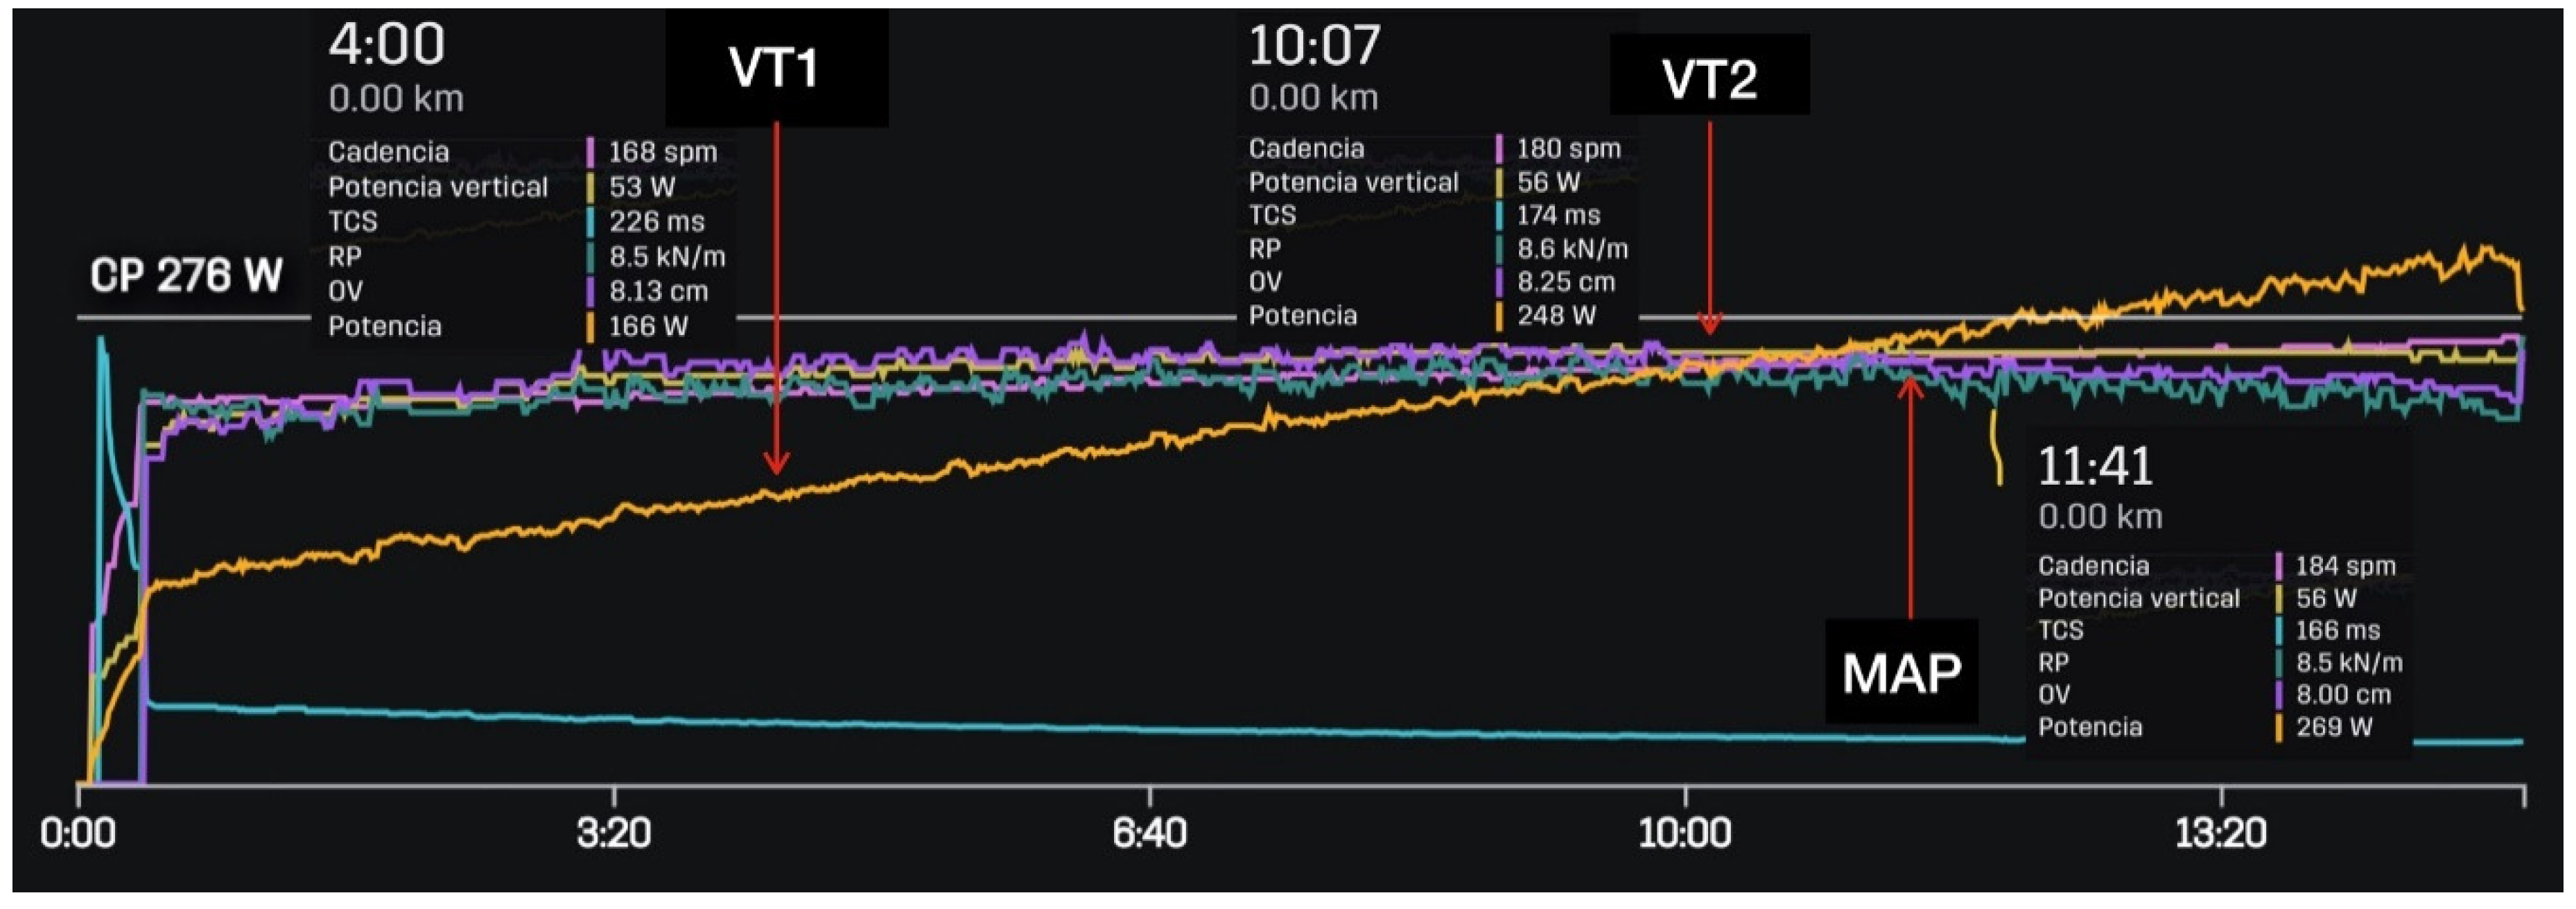 Sensors | Free Full-Text | The Relationship between VO2max, Power  Management, and Increased Running Speed: Towards Gait Pattern Recognition  through Clustering Analysis